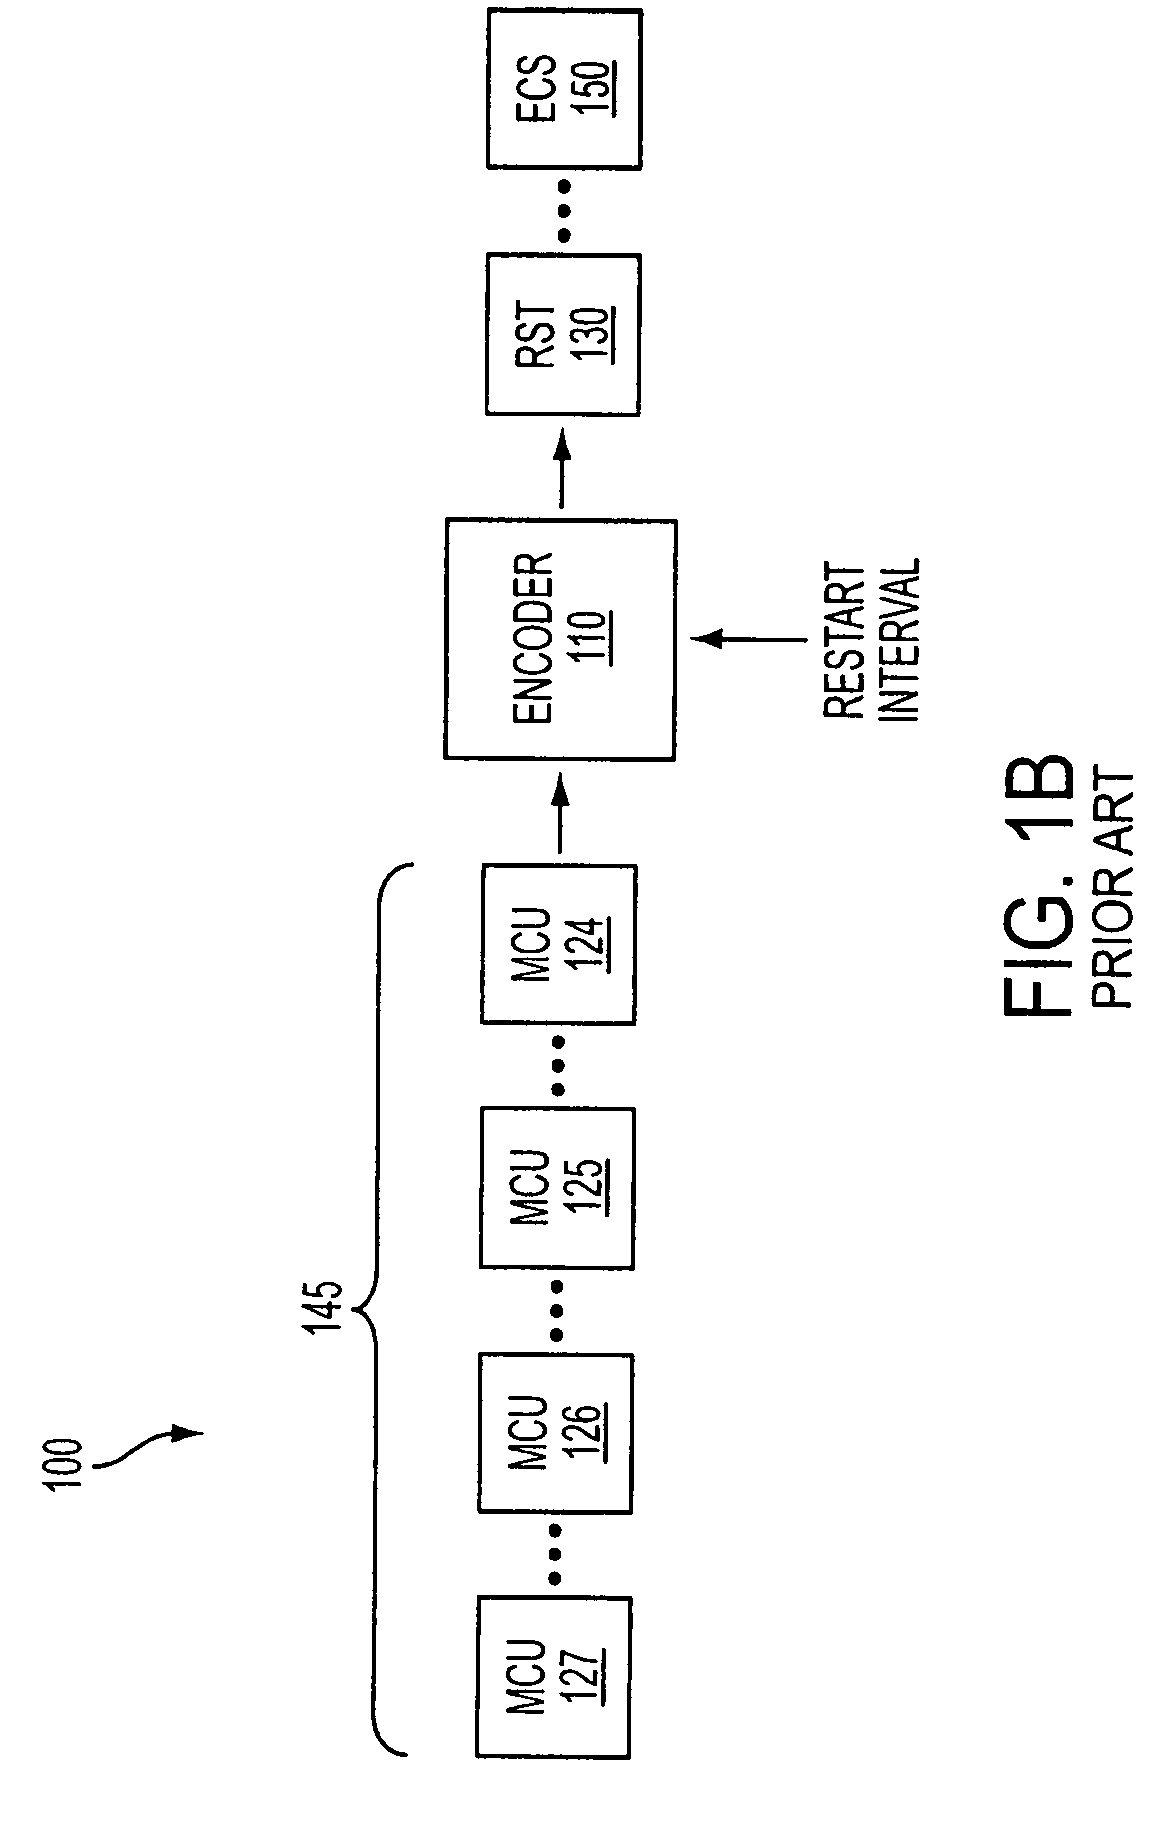 Method and apparatus for parallelization of image compression encoders